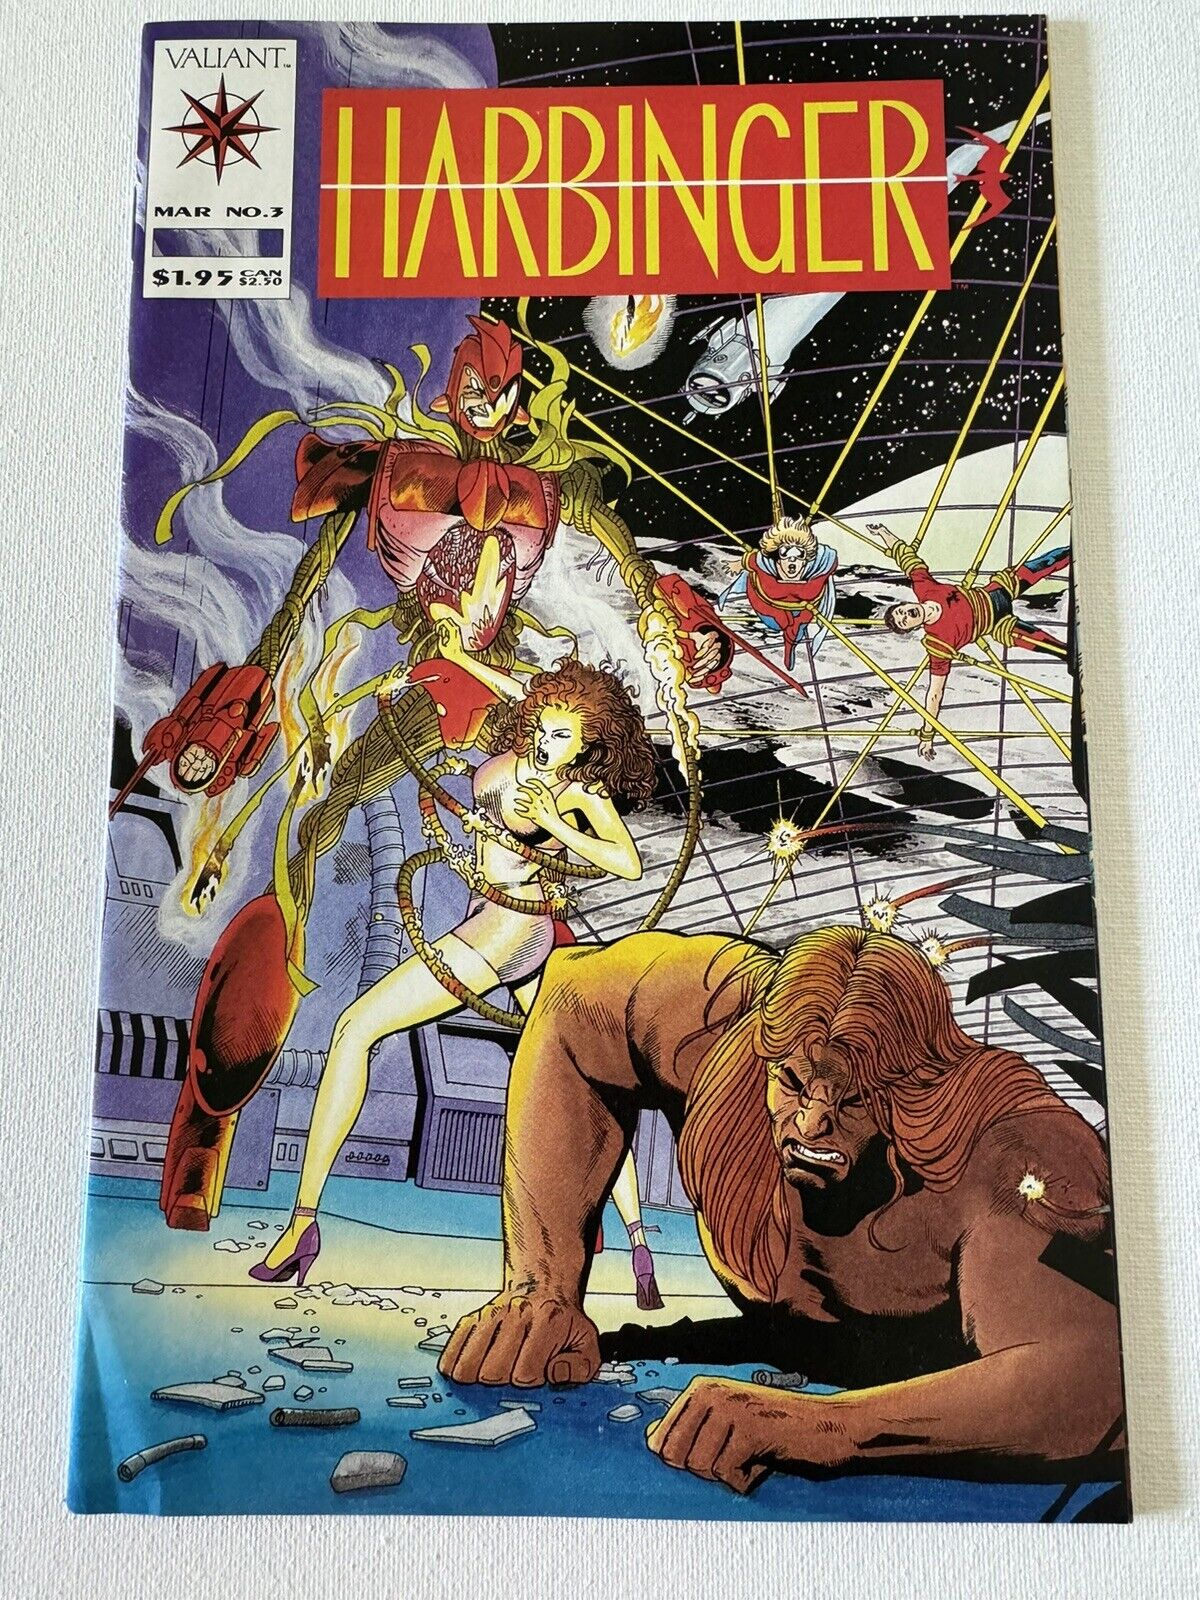 Harbinger #3 (1992) With Coupon